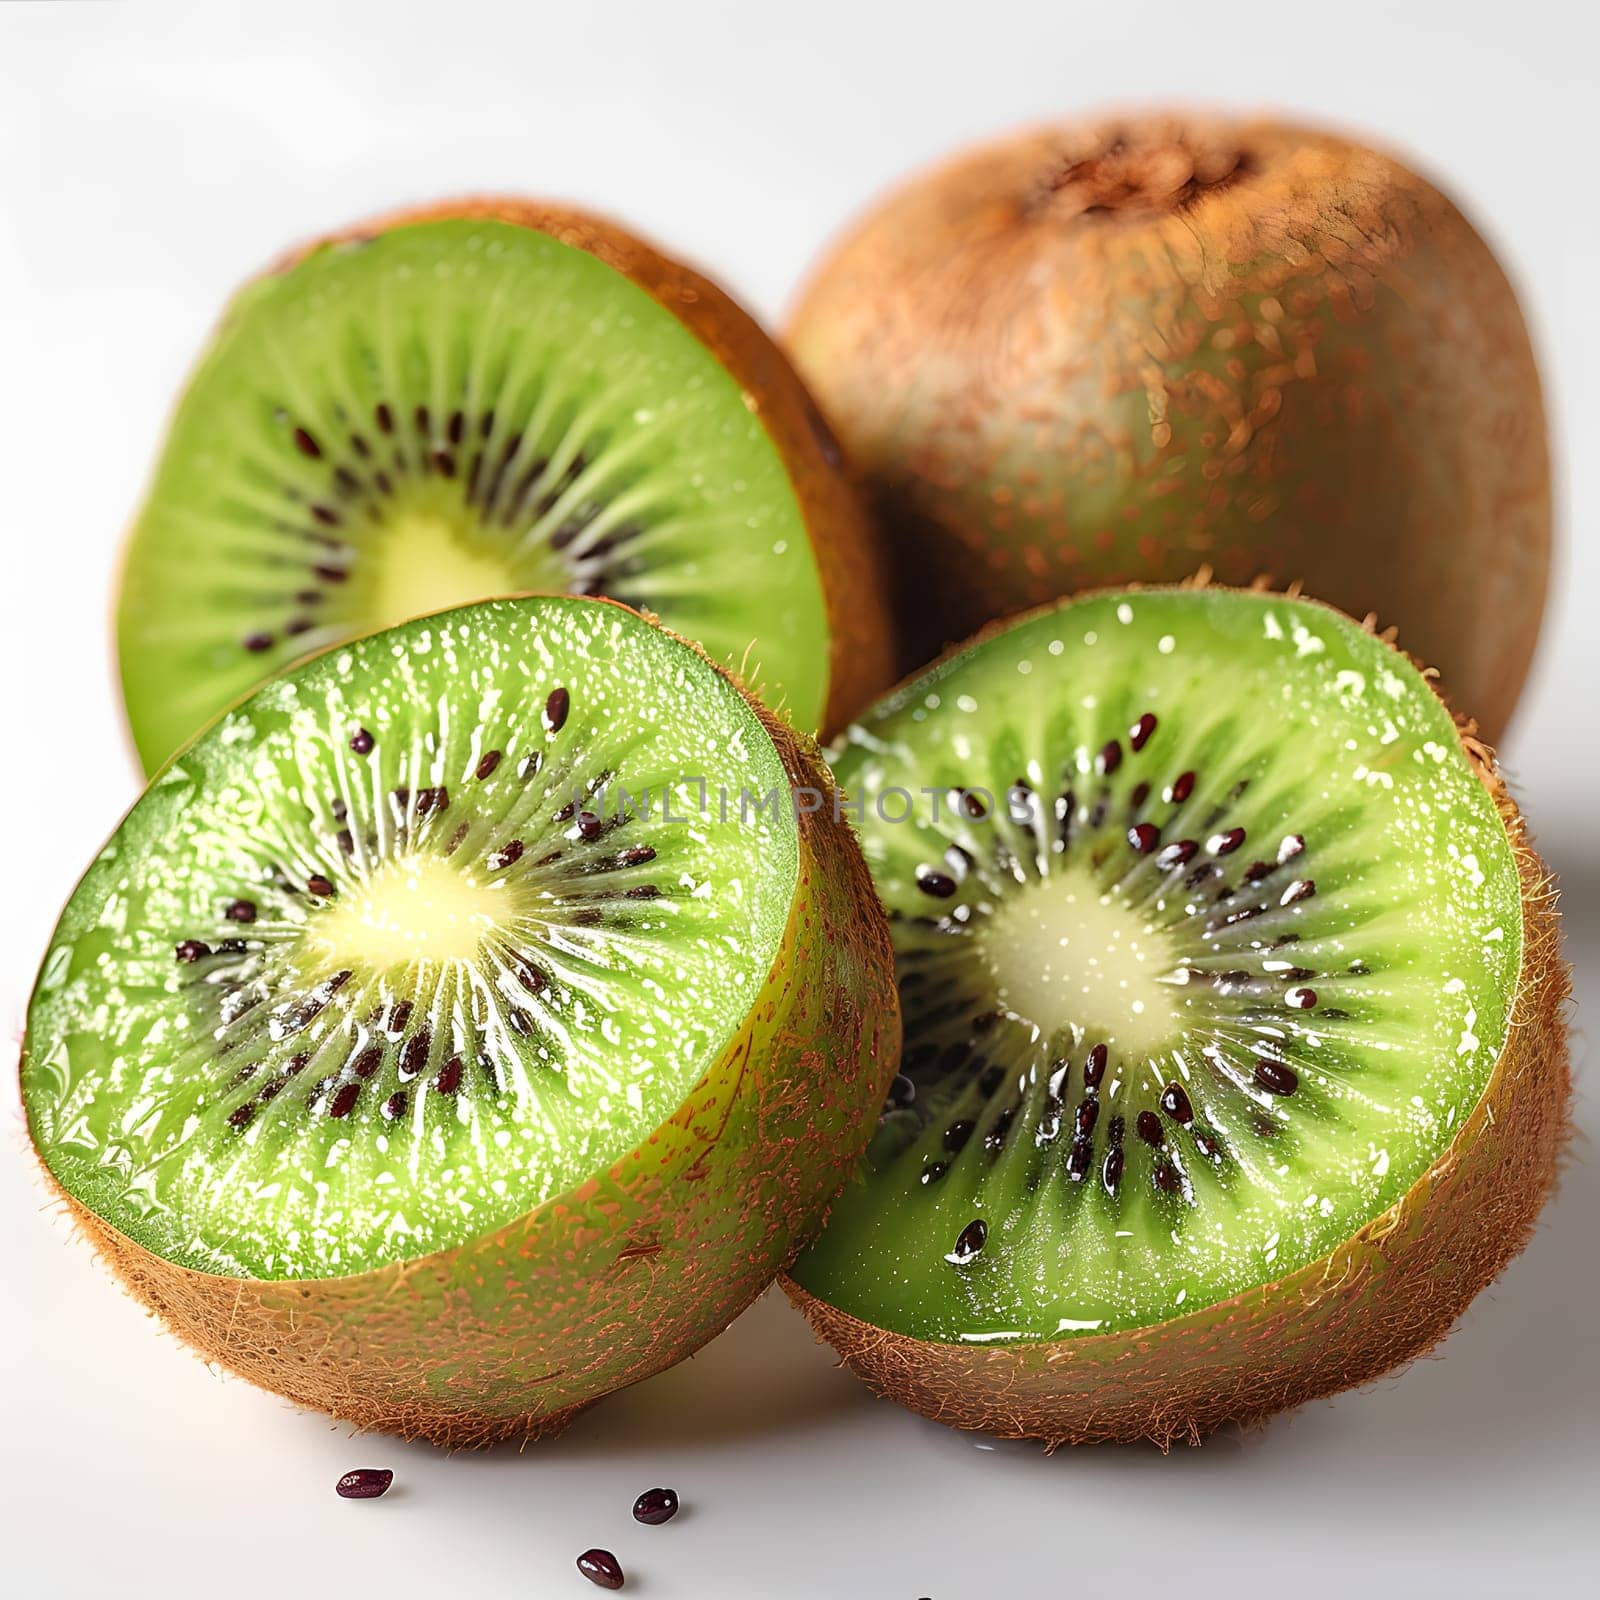 Four halves of Hardy kiwi fruits are displayed on a white surface. This green fruit is a staple food and ingredient in natural foods, produced from a terrestrial plant